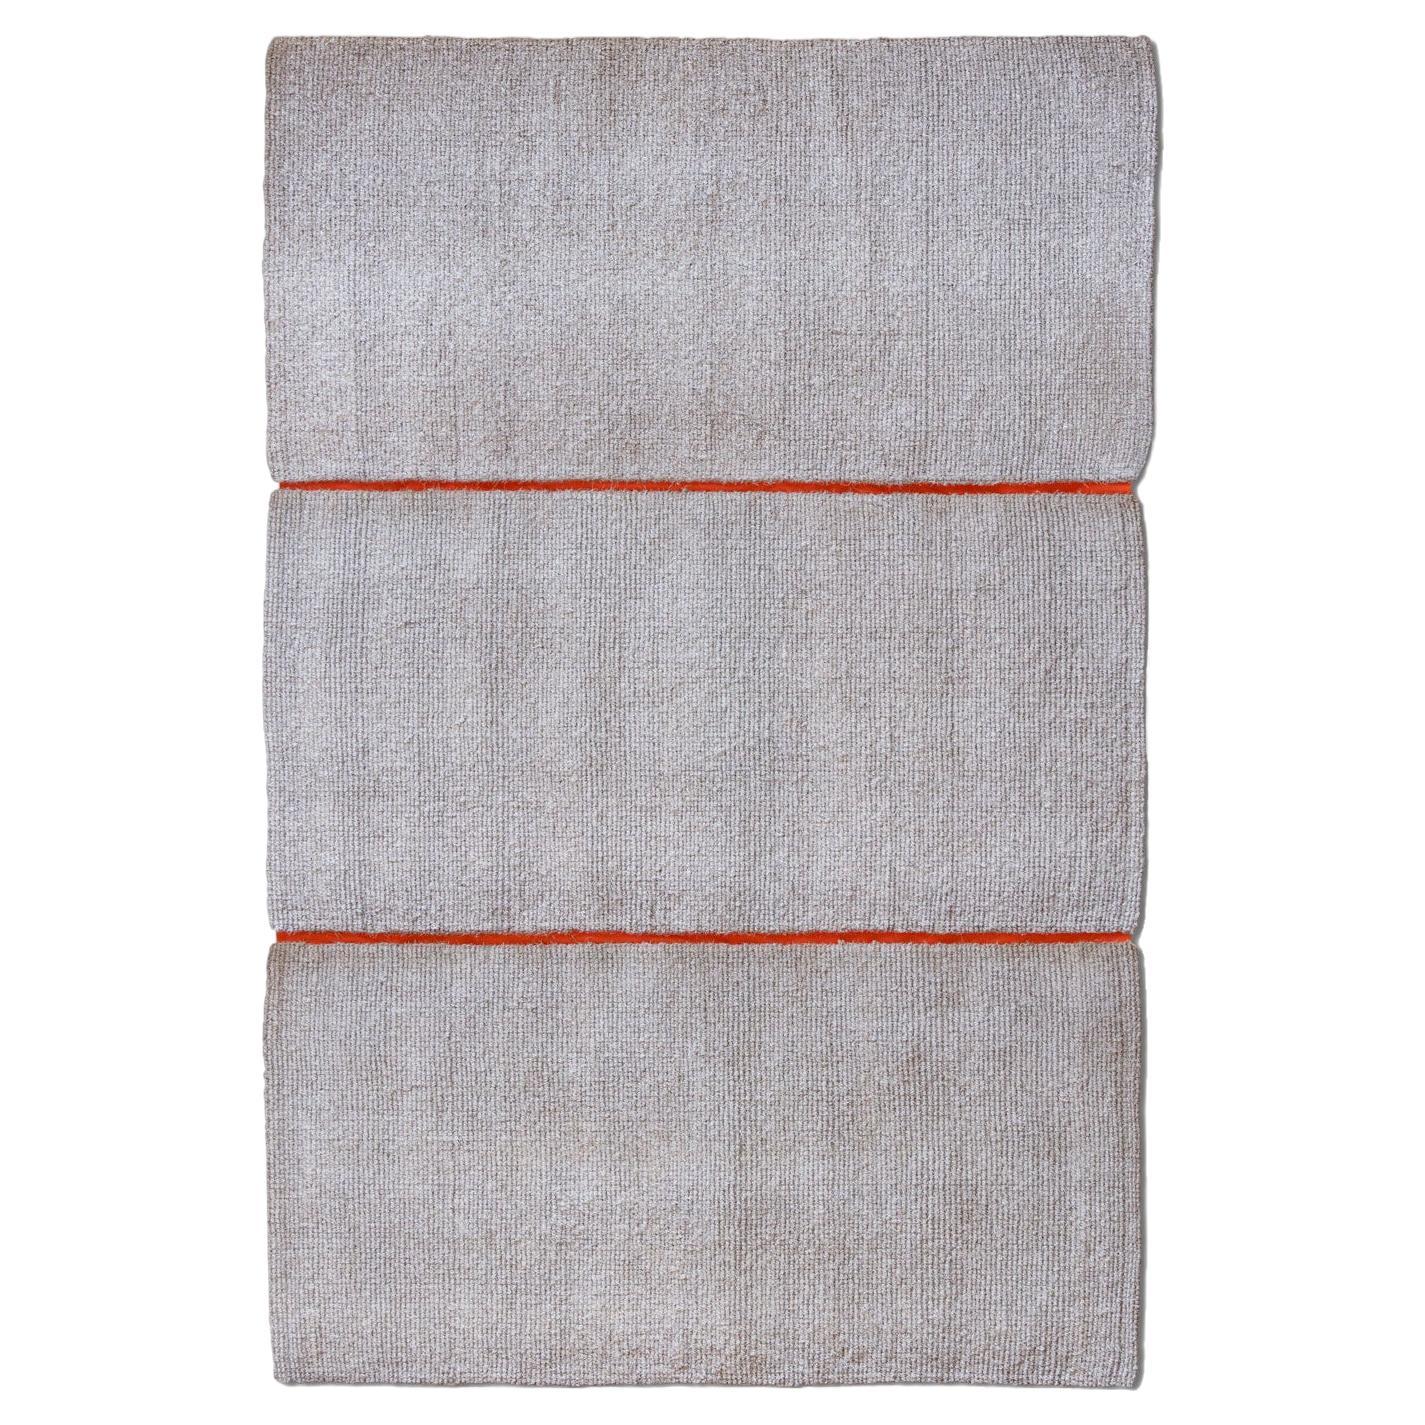 Modular Outdoor Indoor Natural White Coconut Rug by Deanna Comellini 195x285 cm For Sale